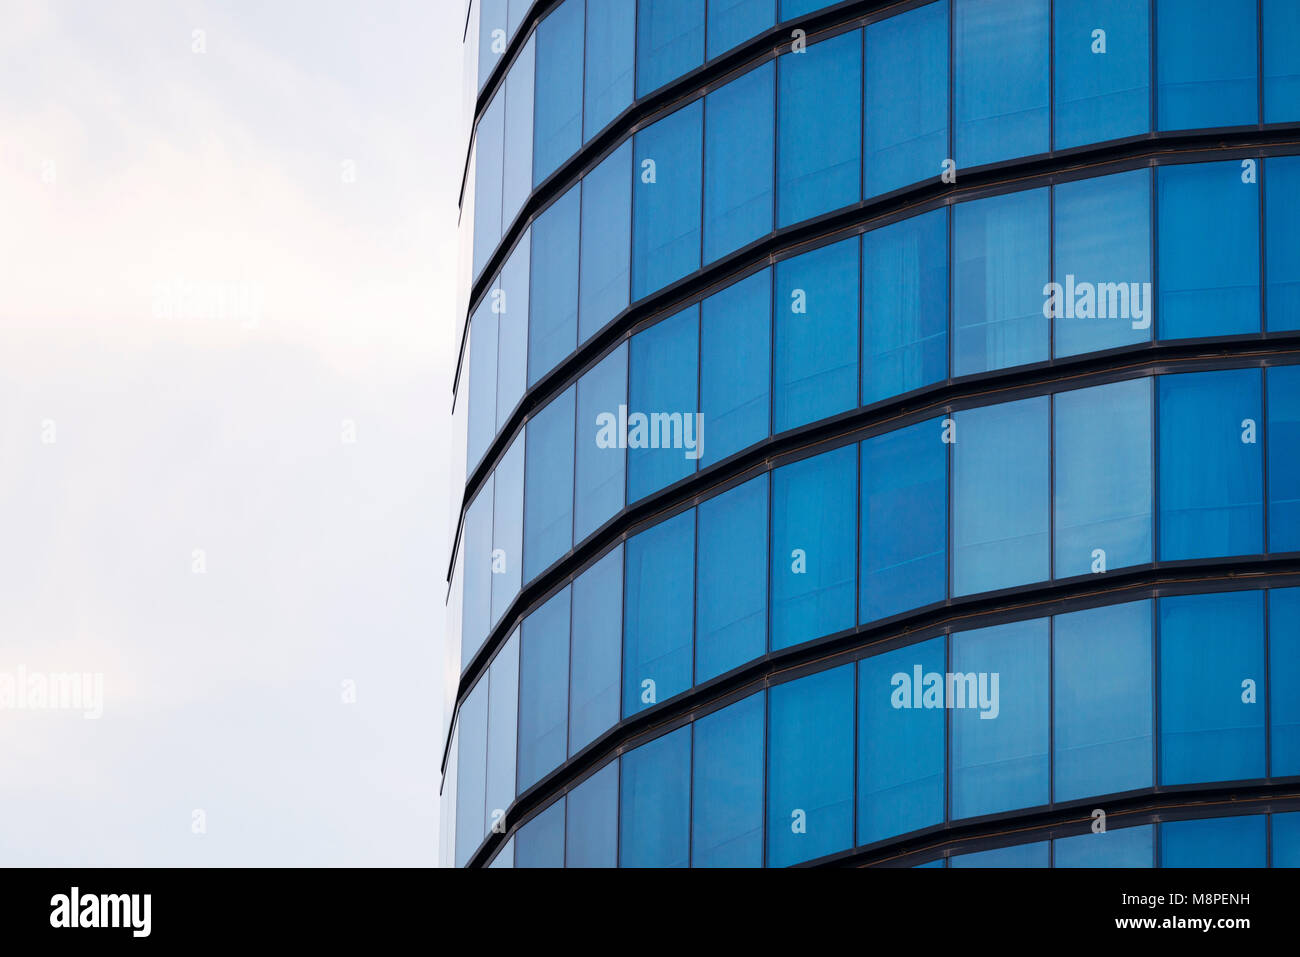 Blue windows of a cylindrical building background texture. Stock Photo